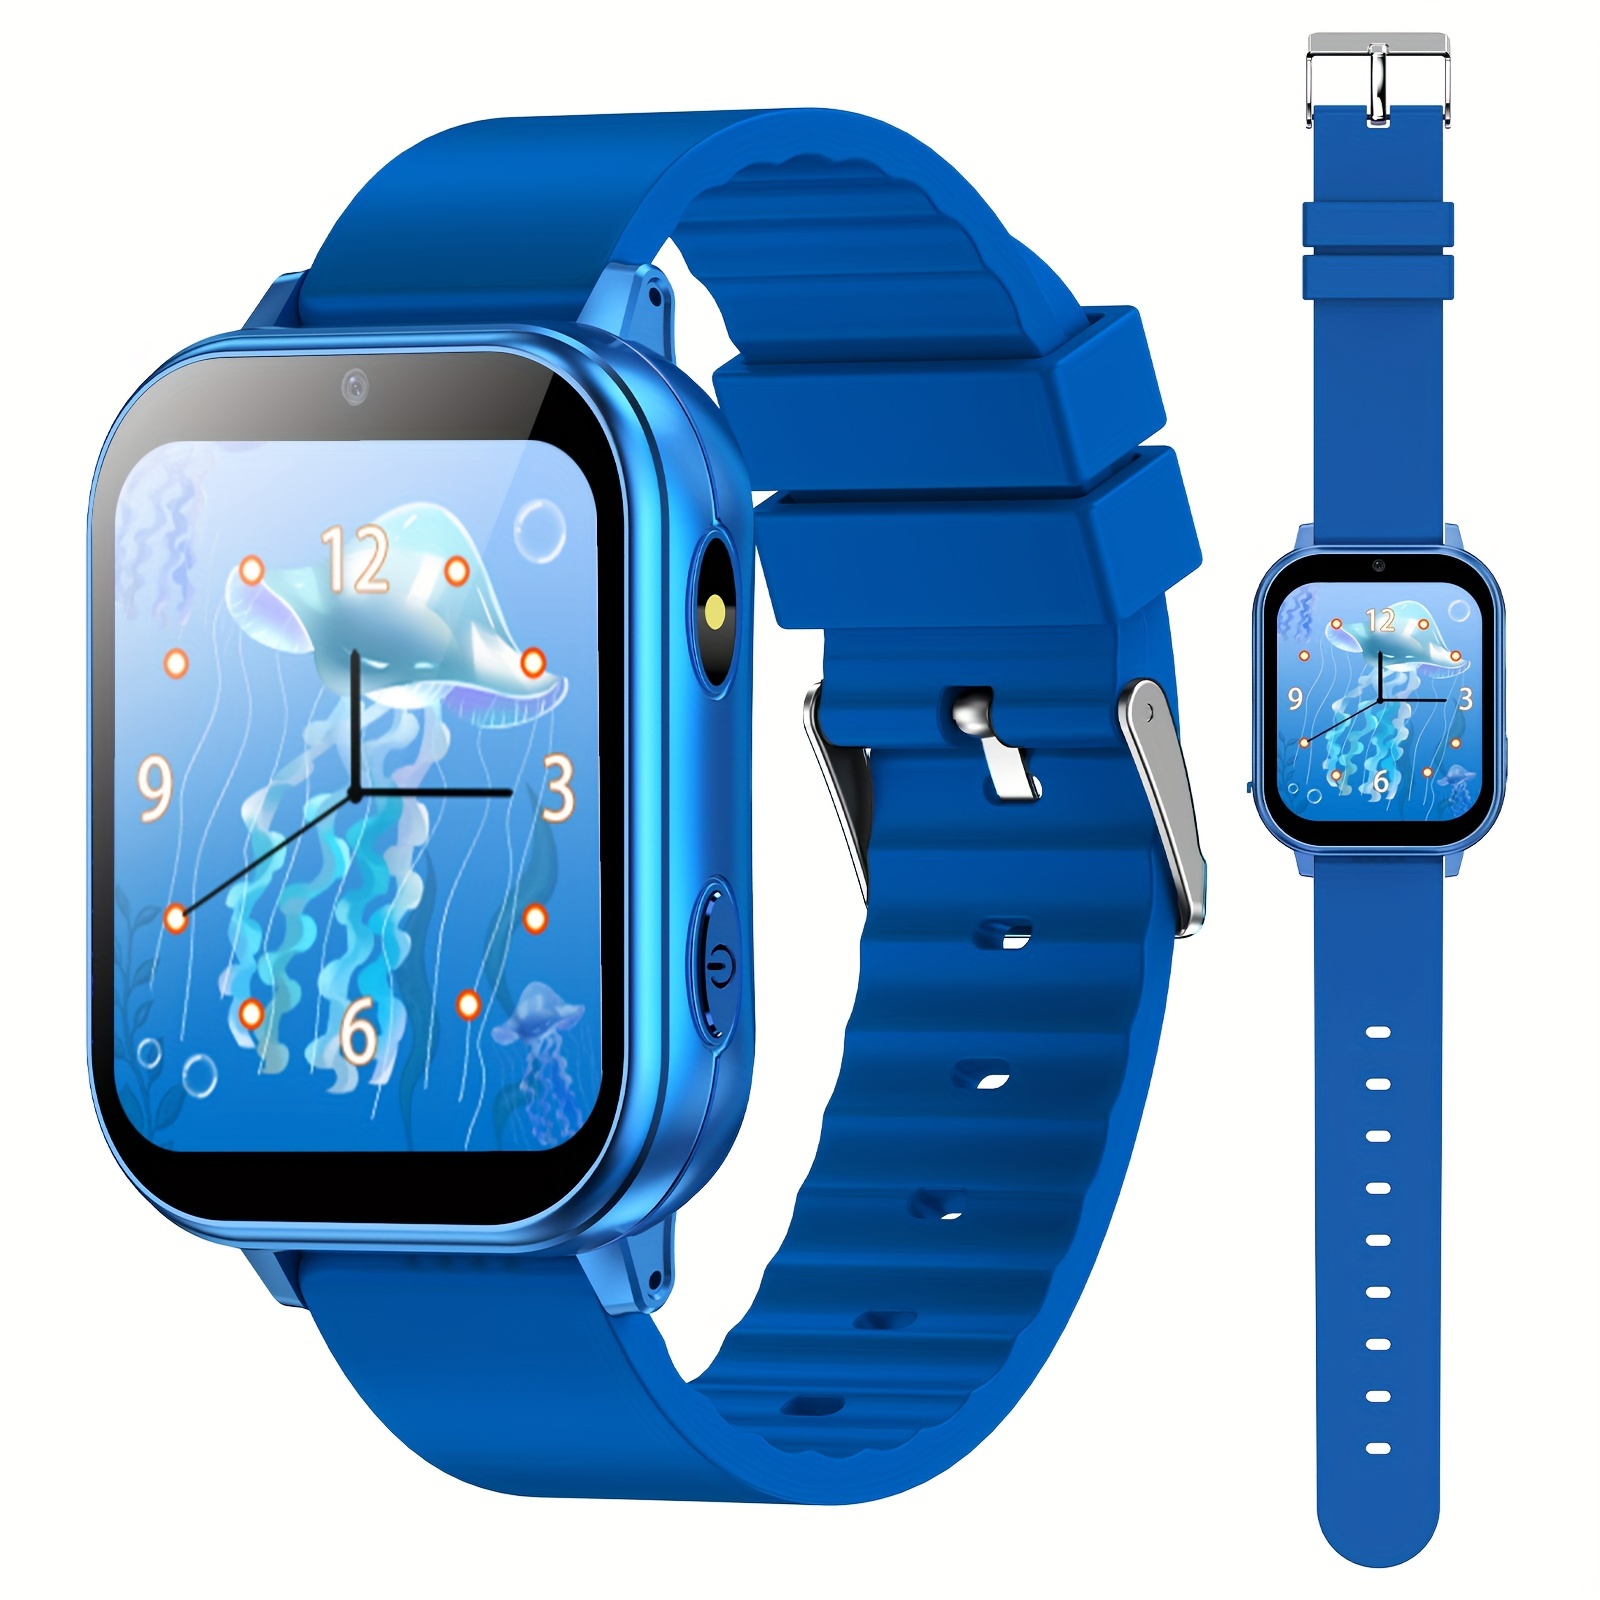 

Pthtechus Smart Watch For Kids Toys, Gift For 4-14 Ys Boys And Girls With 22 Games Hd Camera Video Music Player Pedometer Alarm Clock Smartwatches For Children Blue